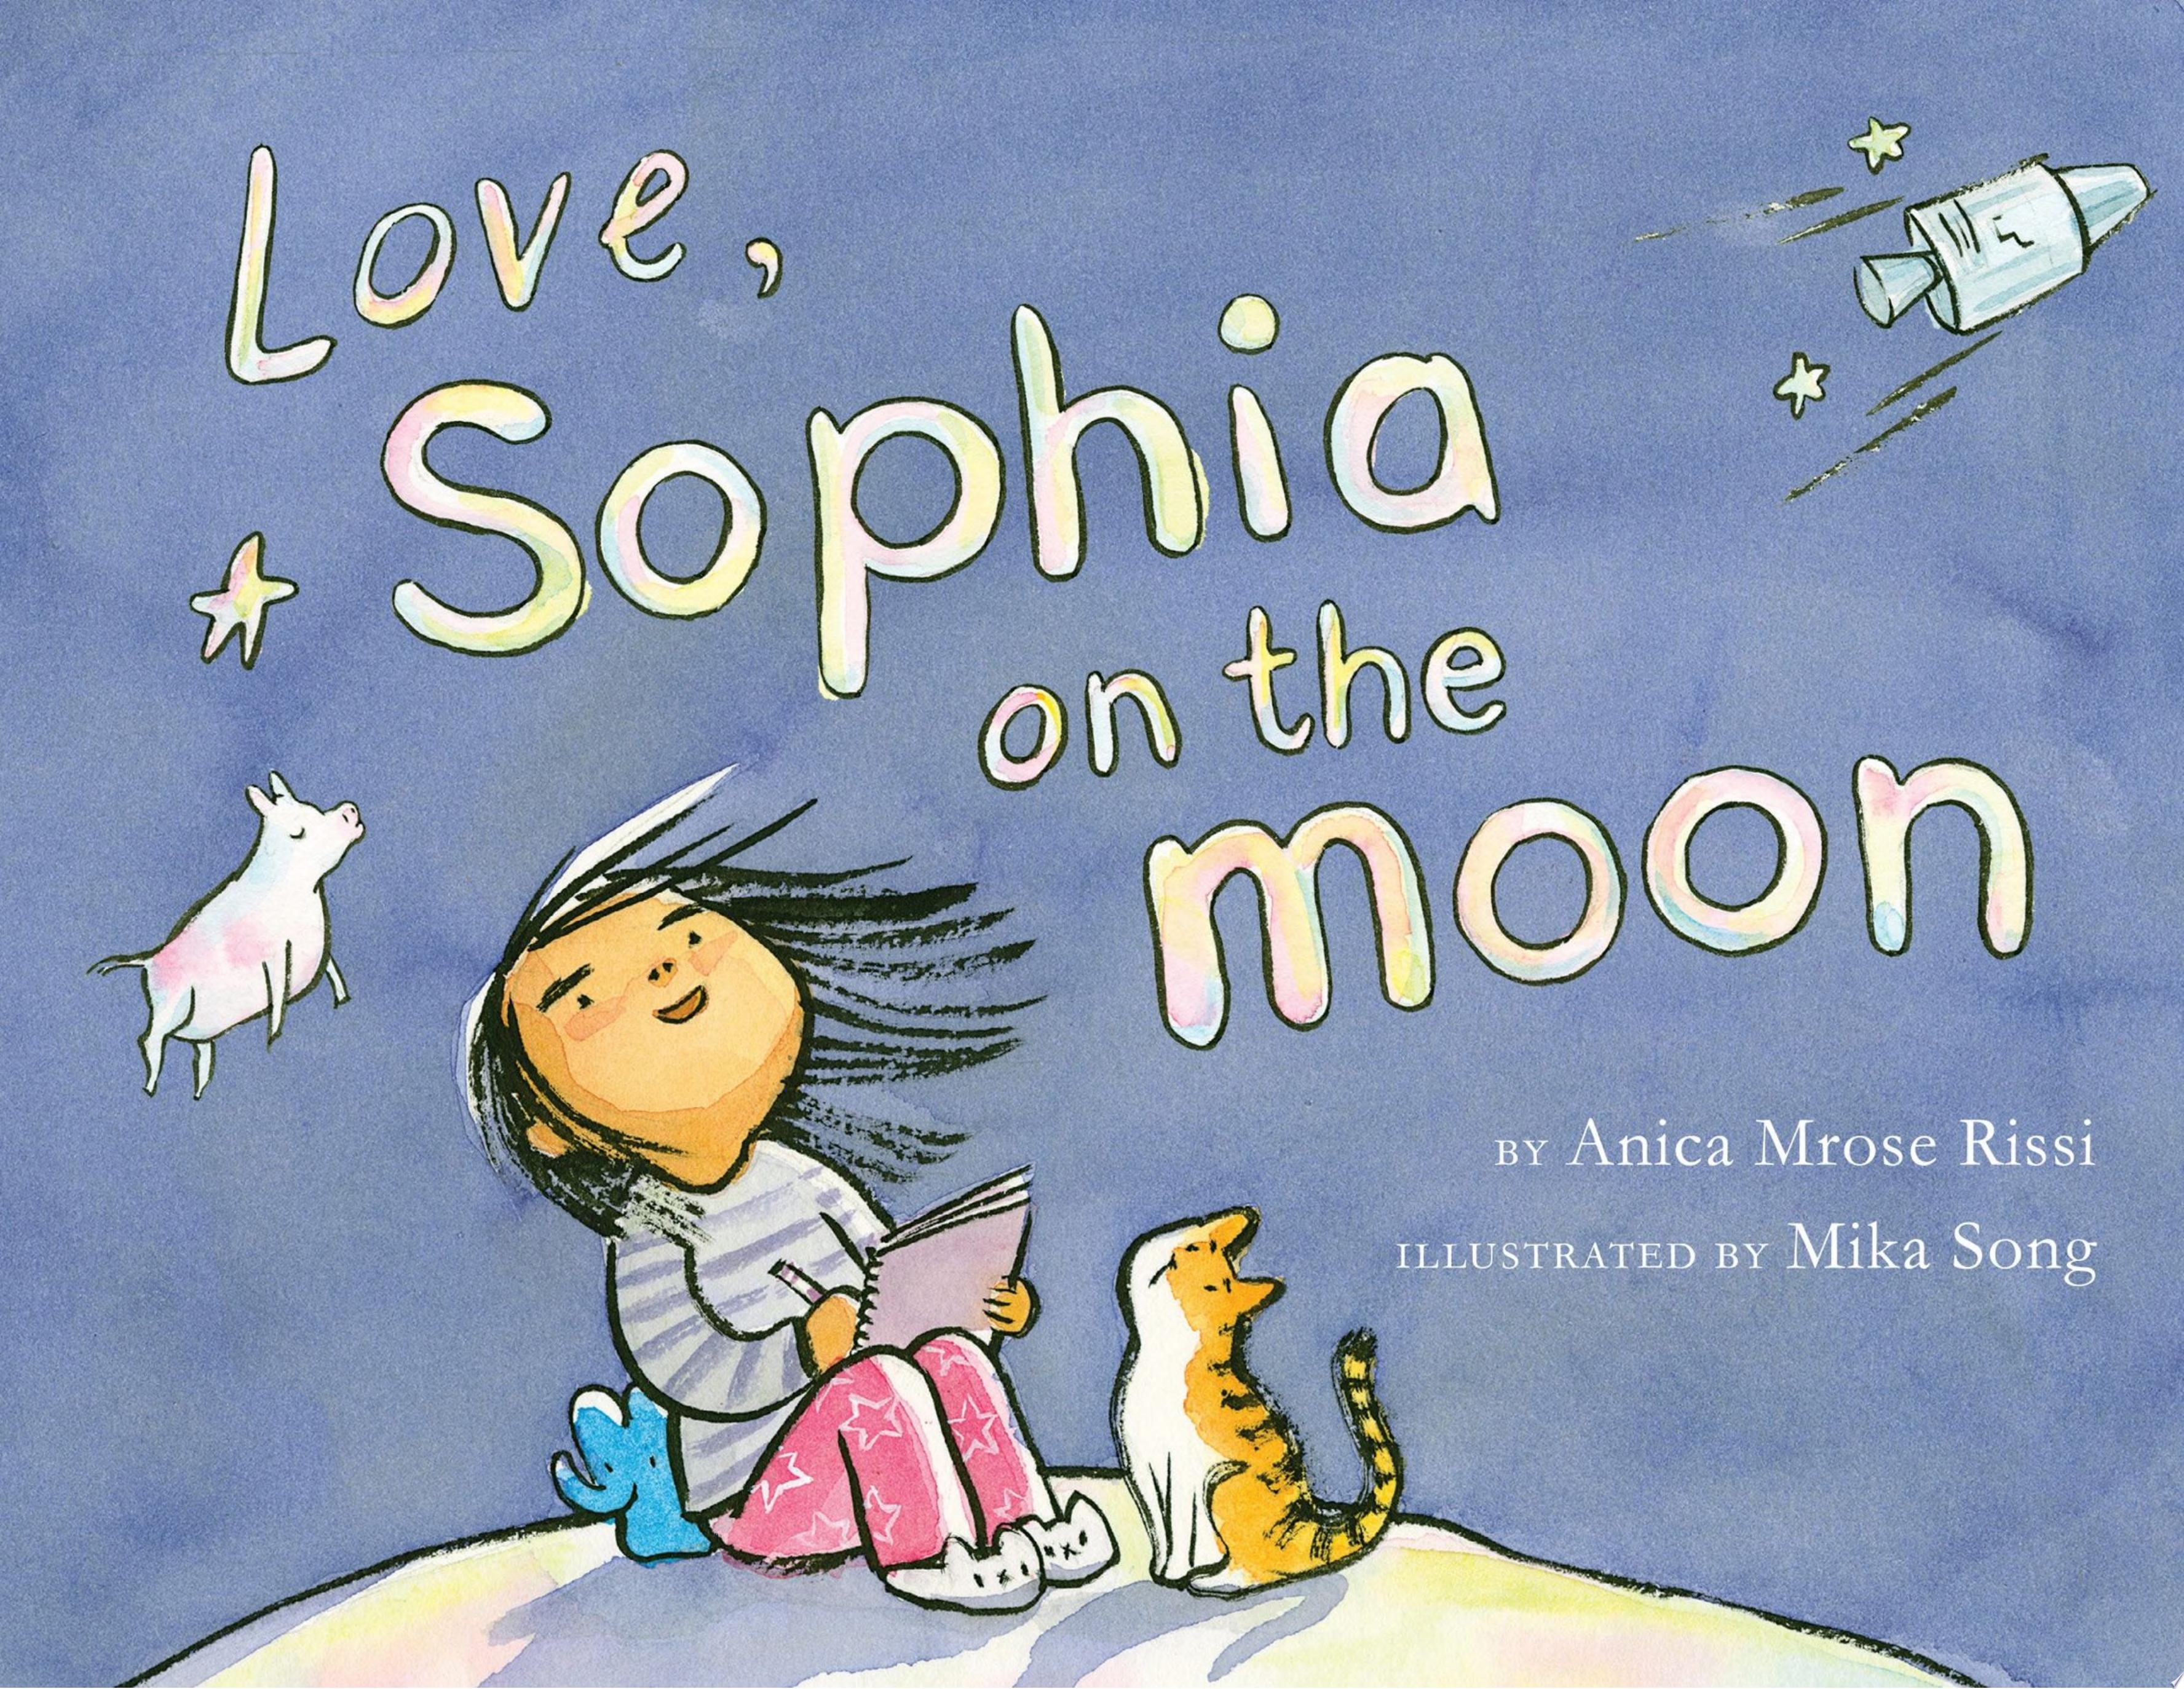 Image for "Love, Sophia on the Moon"